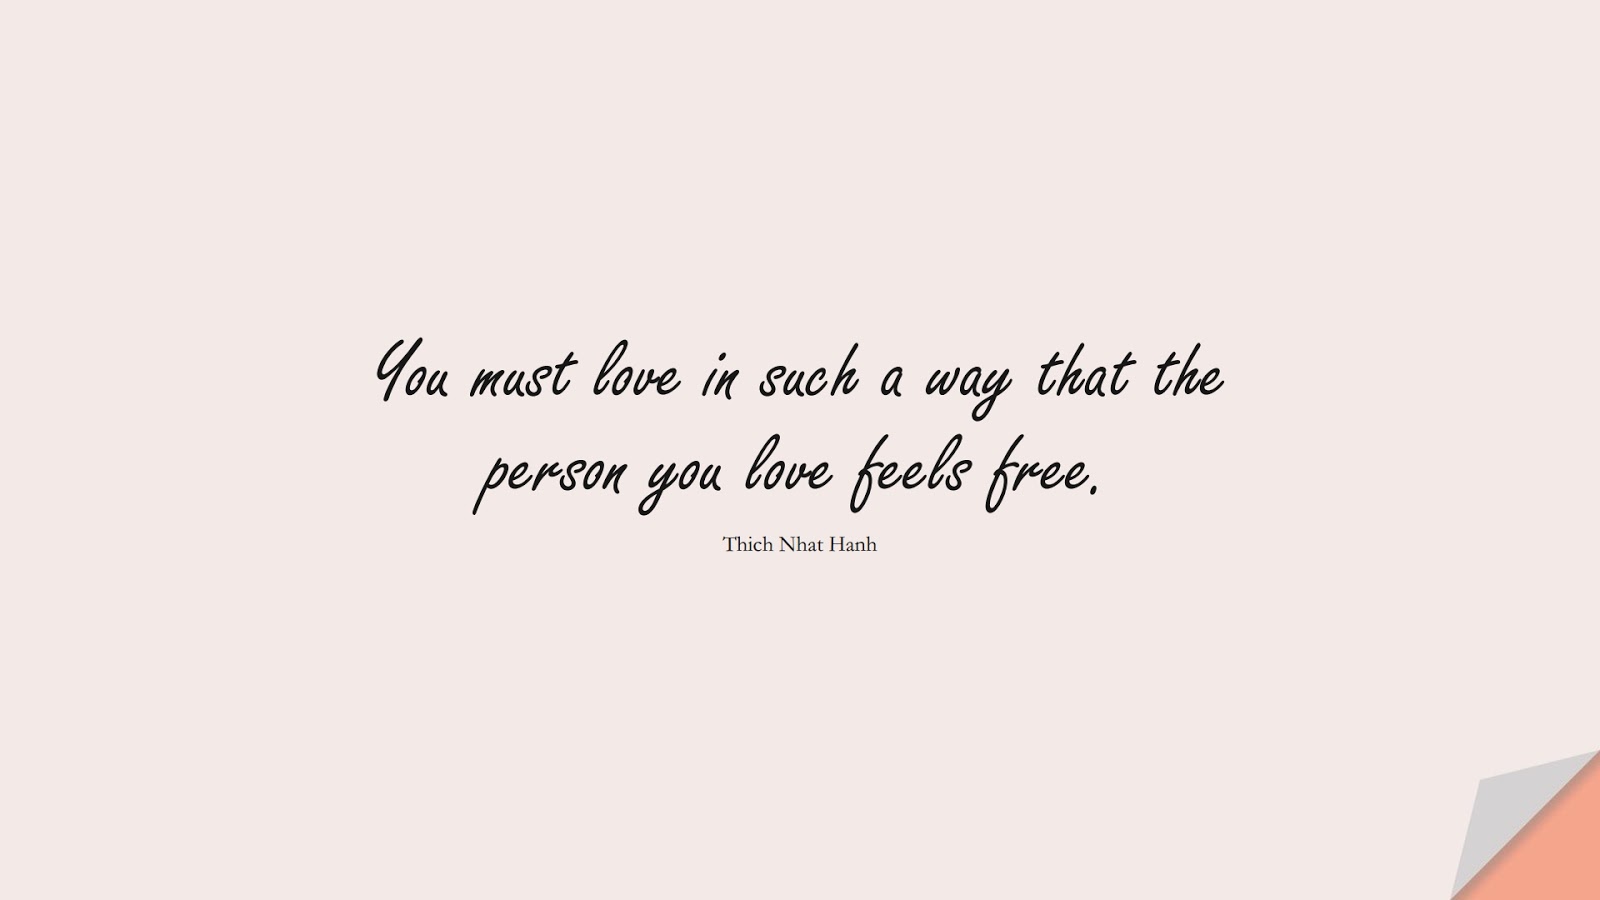 You must love in such a way that the person you love feels free. (Thich Nhat Hanh);  #LoveQuotes